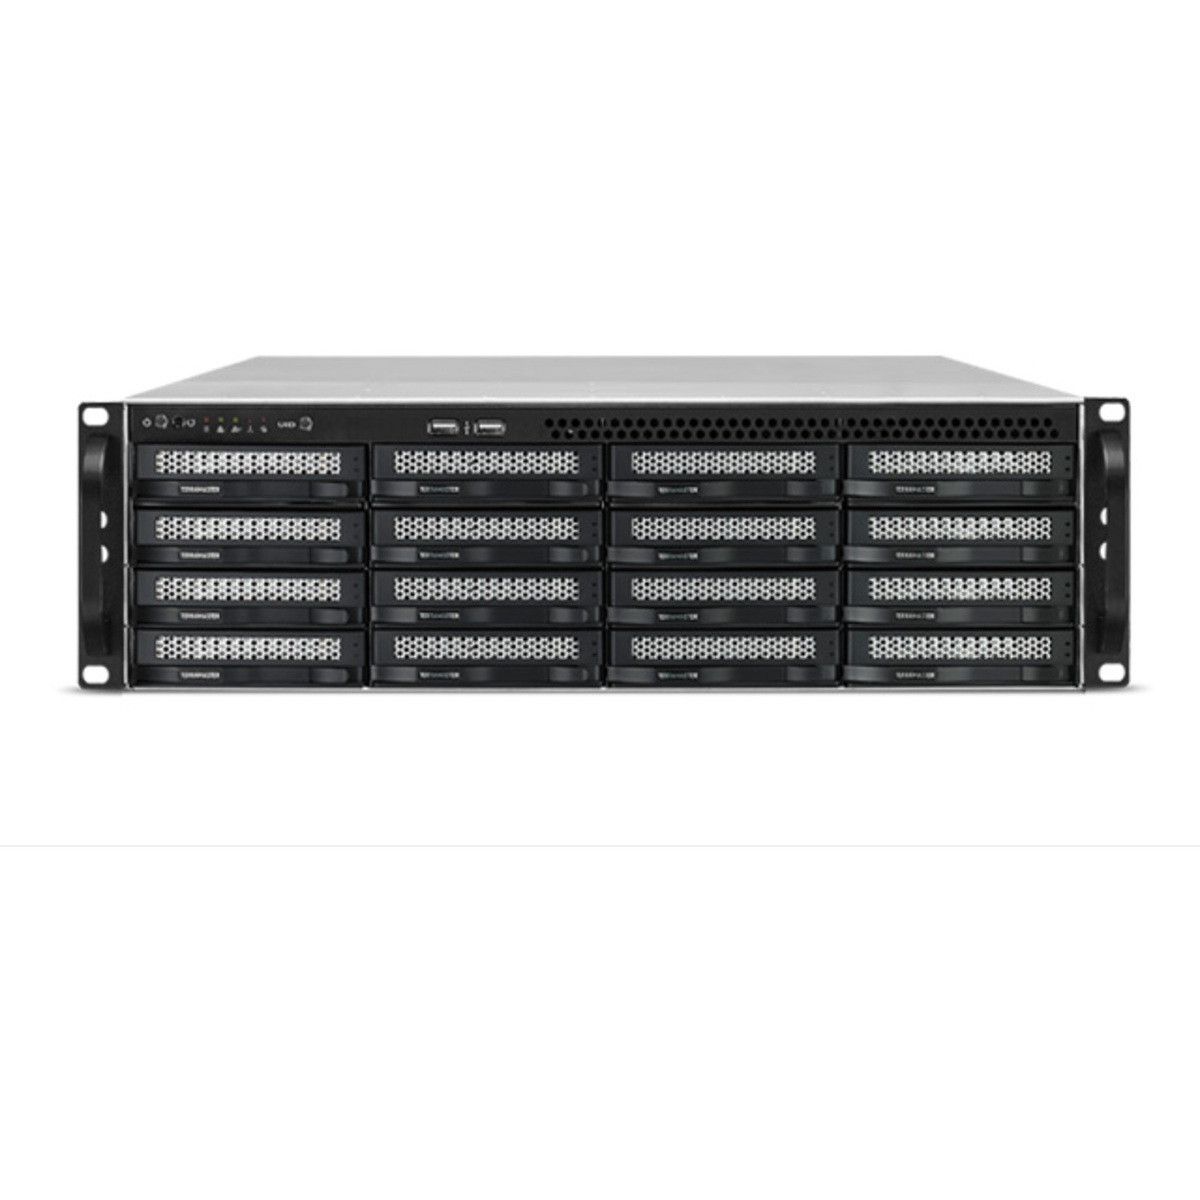 TerraMaster U16-722-2224 30tb 16-Bay RackMount Large Business / Enterprise NAS - Network Attached Storage Device 15x2tb Western Digital Red Plus WD20EFZX 3.5 5400rpm SATA 6Gb/s HDD NAS Class Drives Installed - Burn-In Tested U16-722-2224